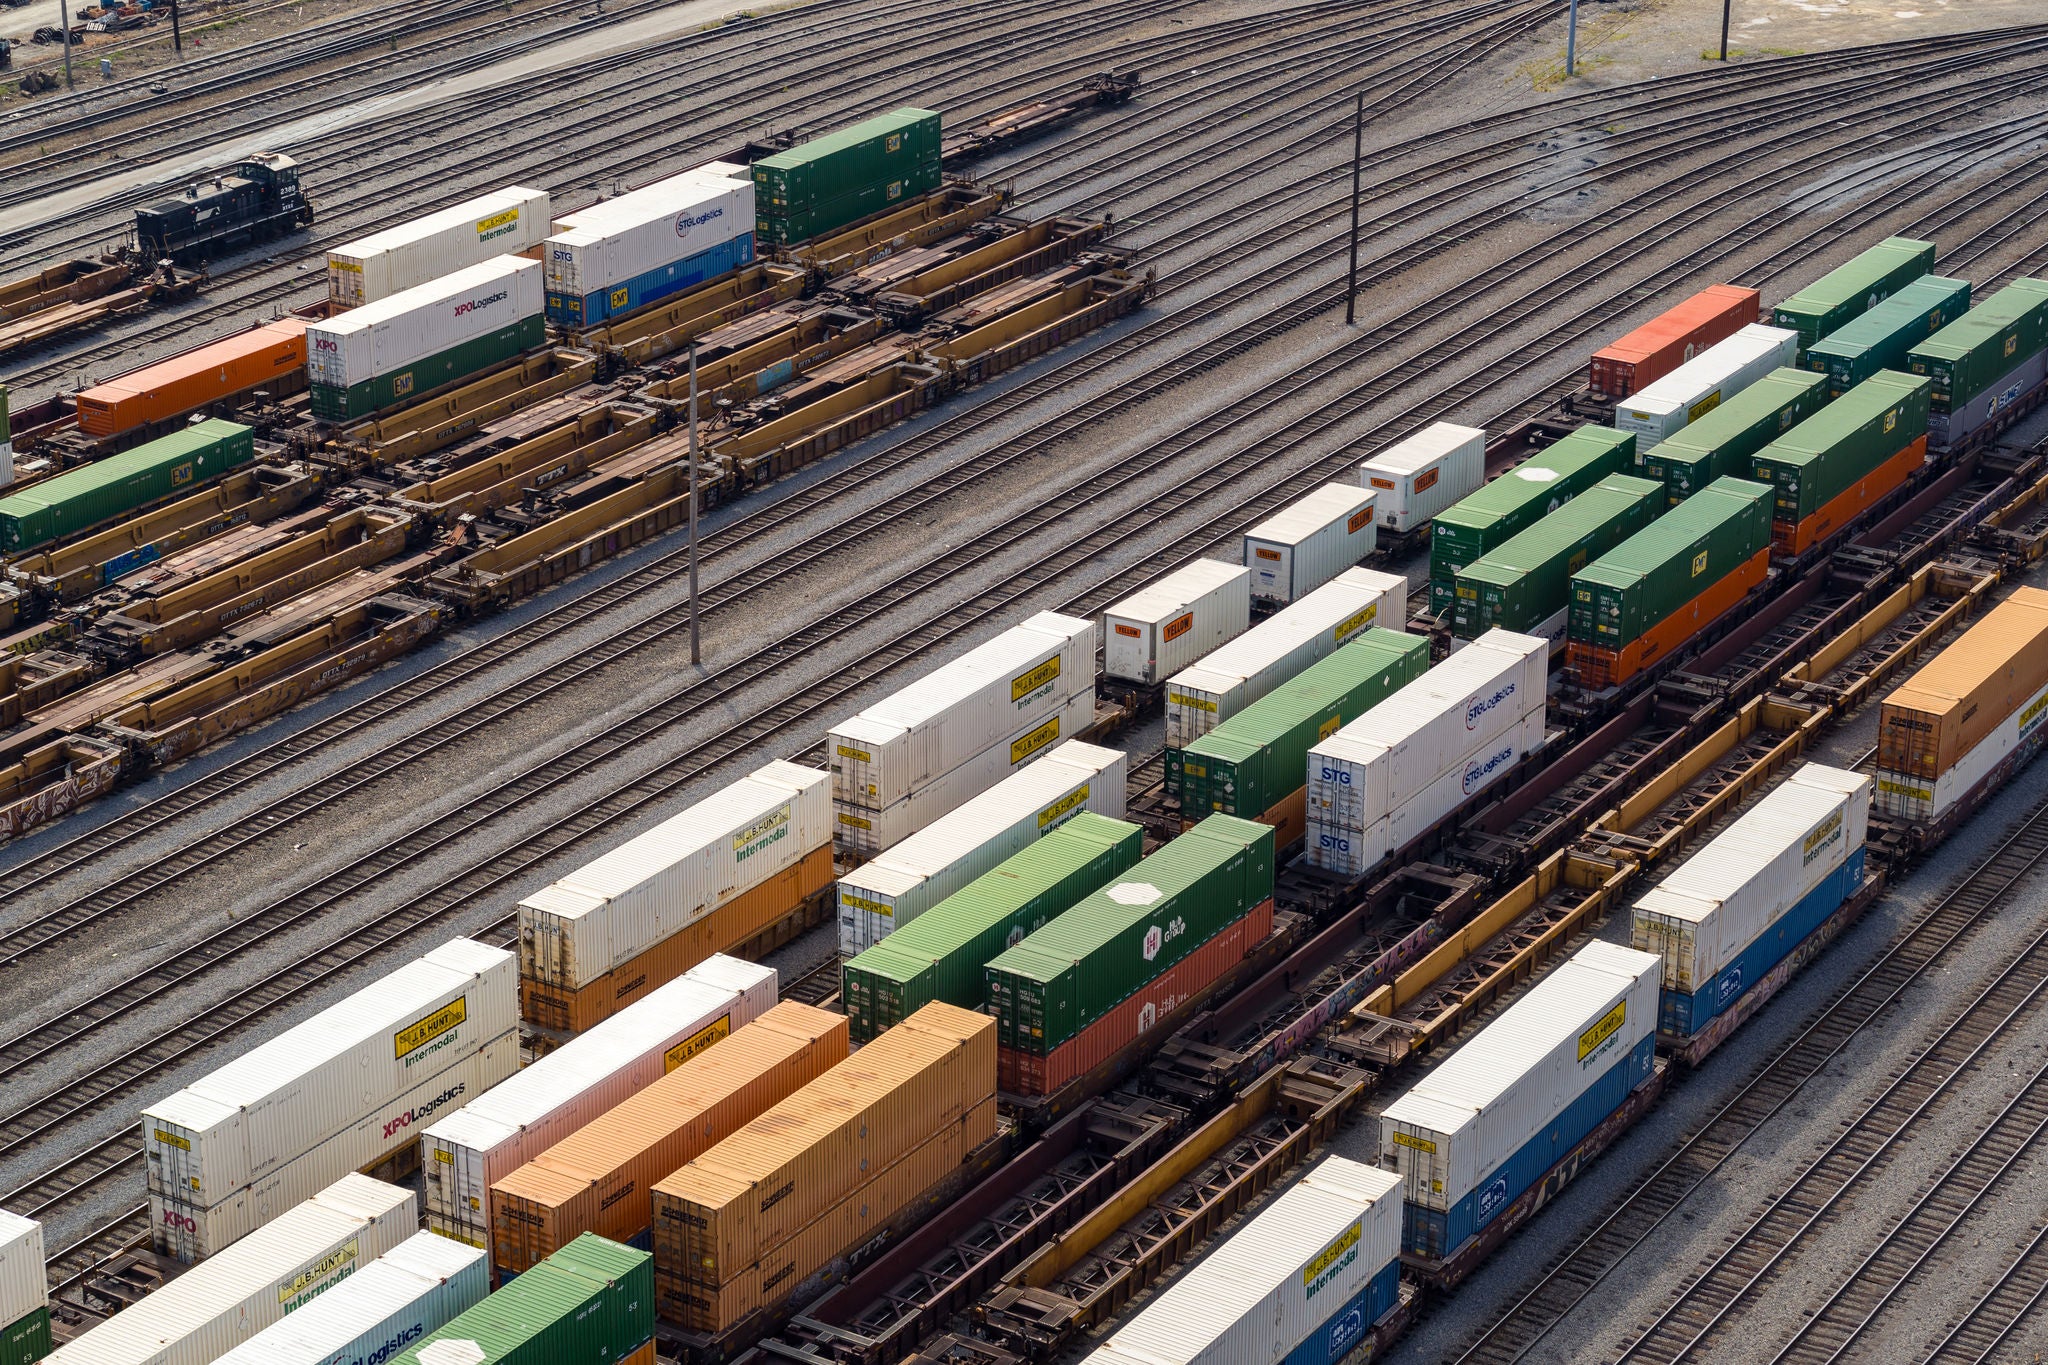 Aerial image of Norfolk Southern railcars in a train yard ready to ship agricultural products